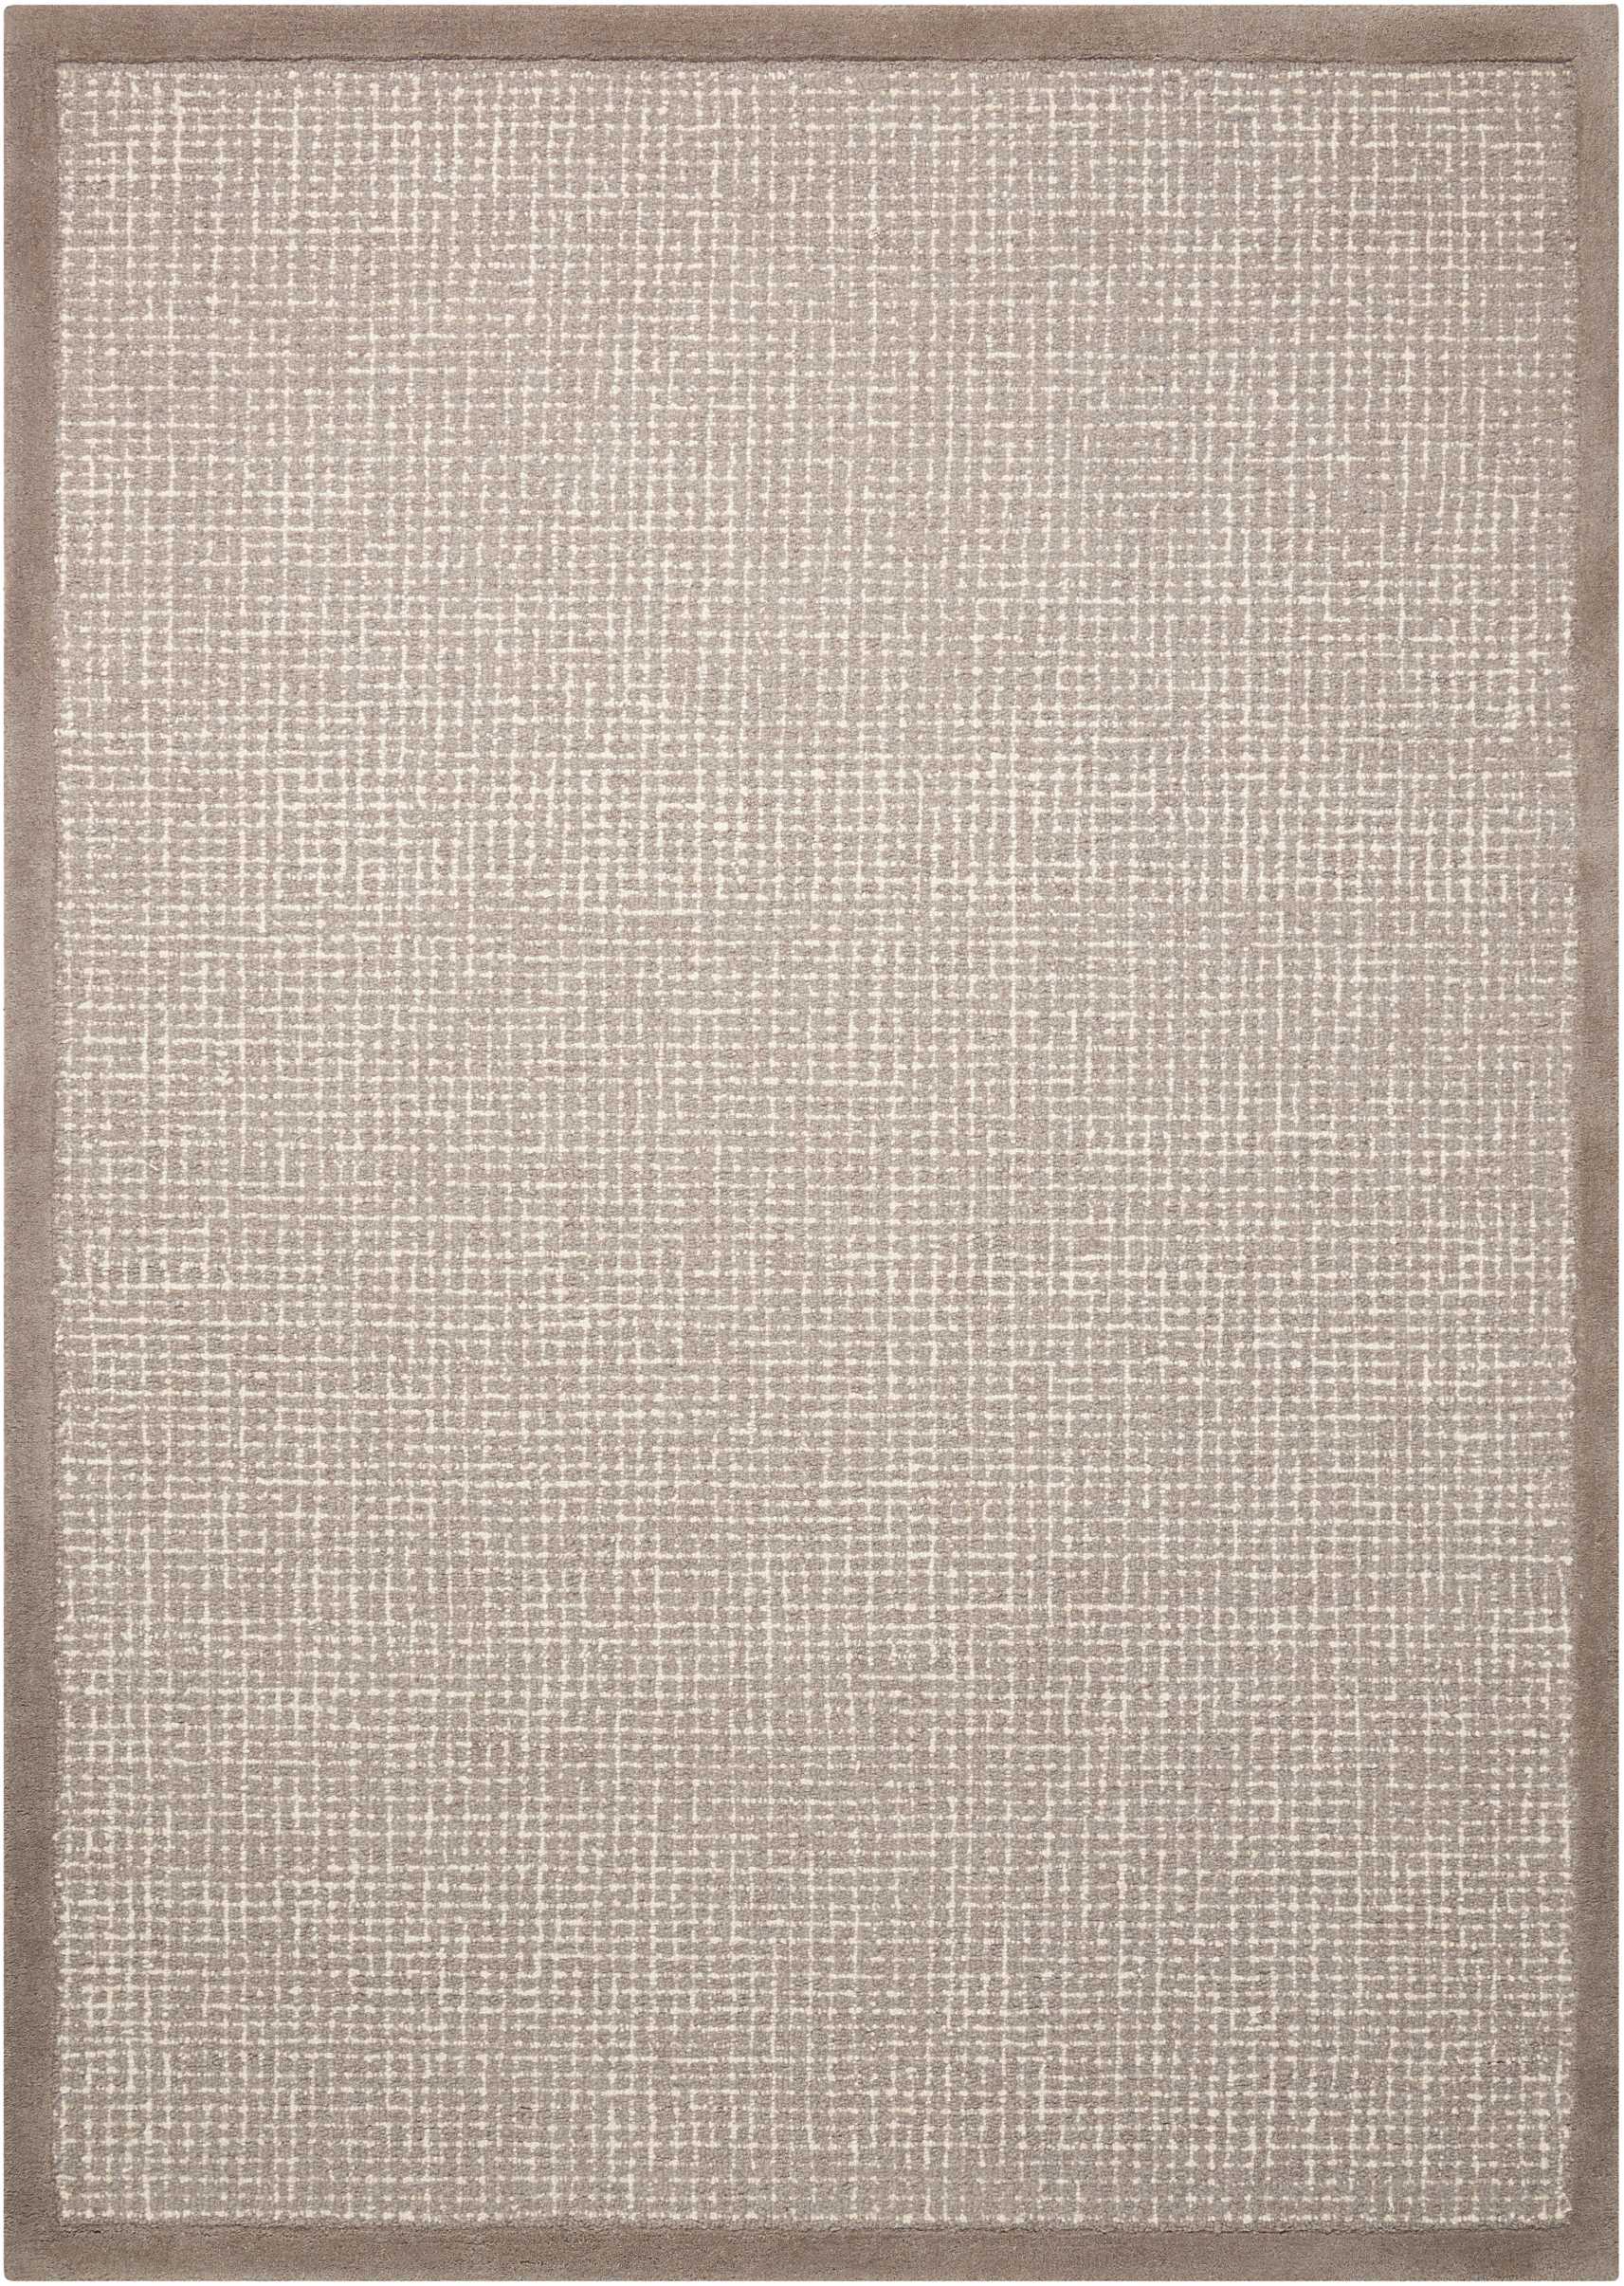 Kathy Ireland River Brook Grey/Ivory Area Rug by Nourison